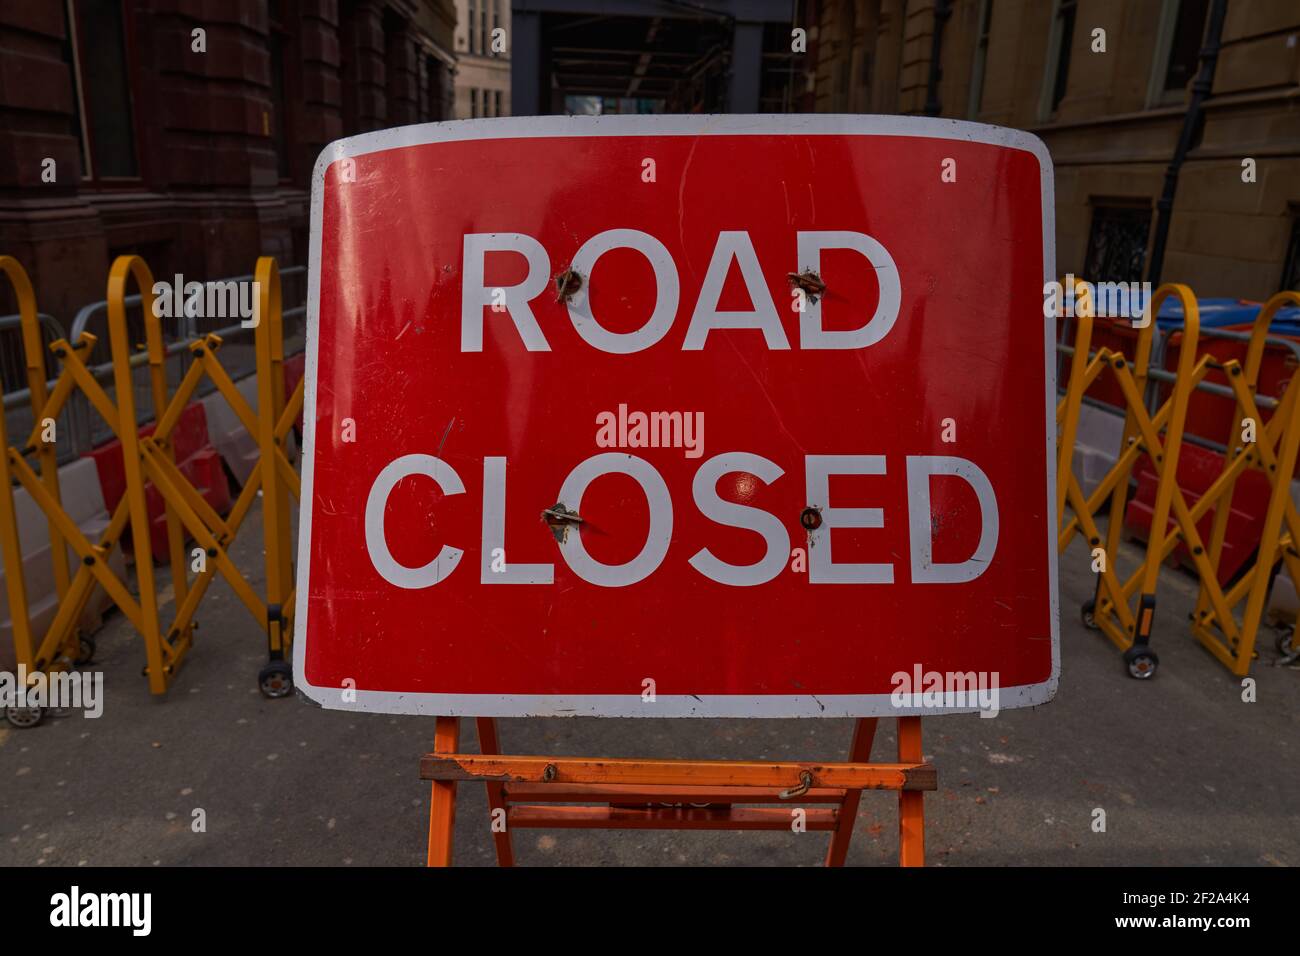 Closed road sign in Manchester city centre Stock Photo